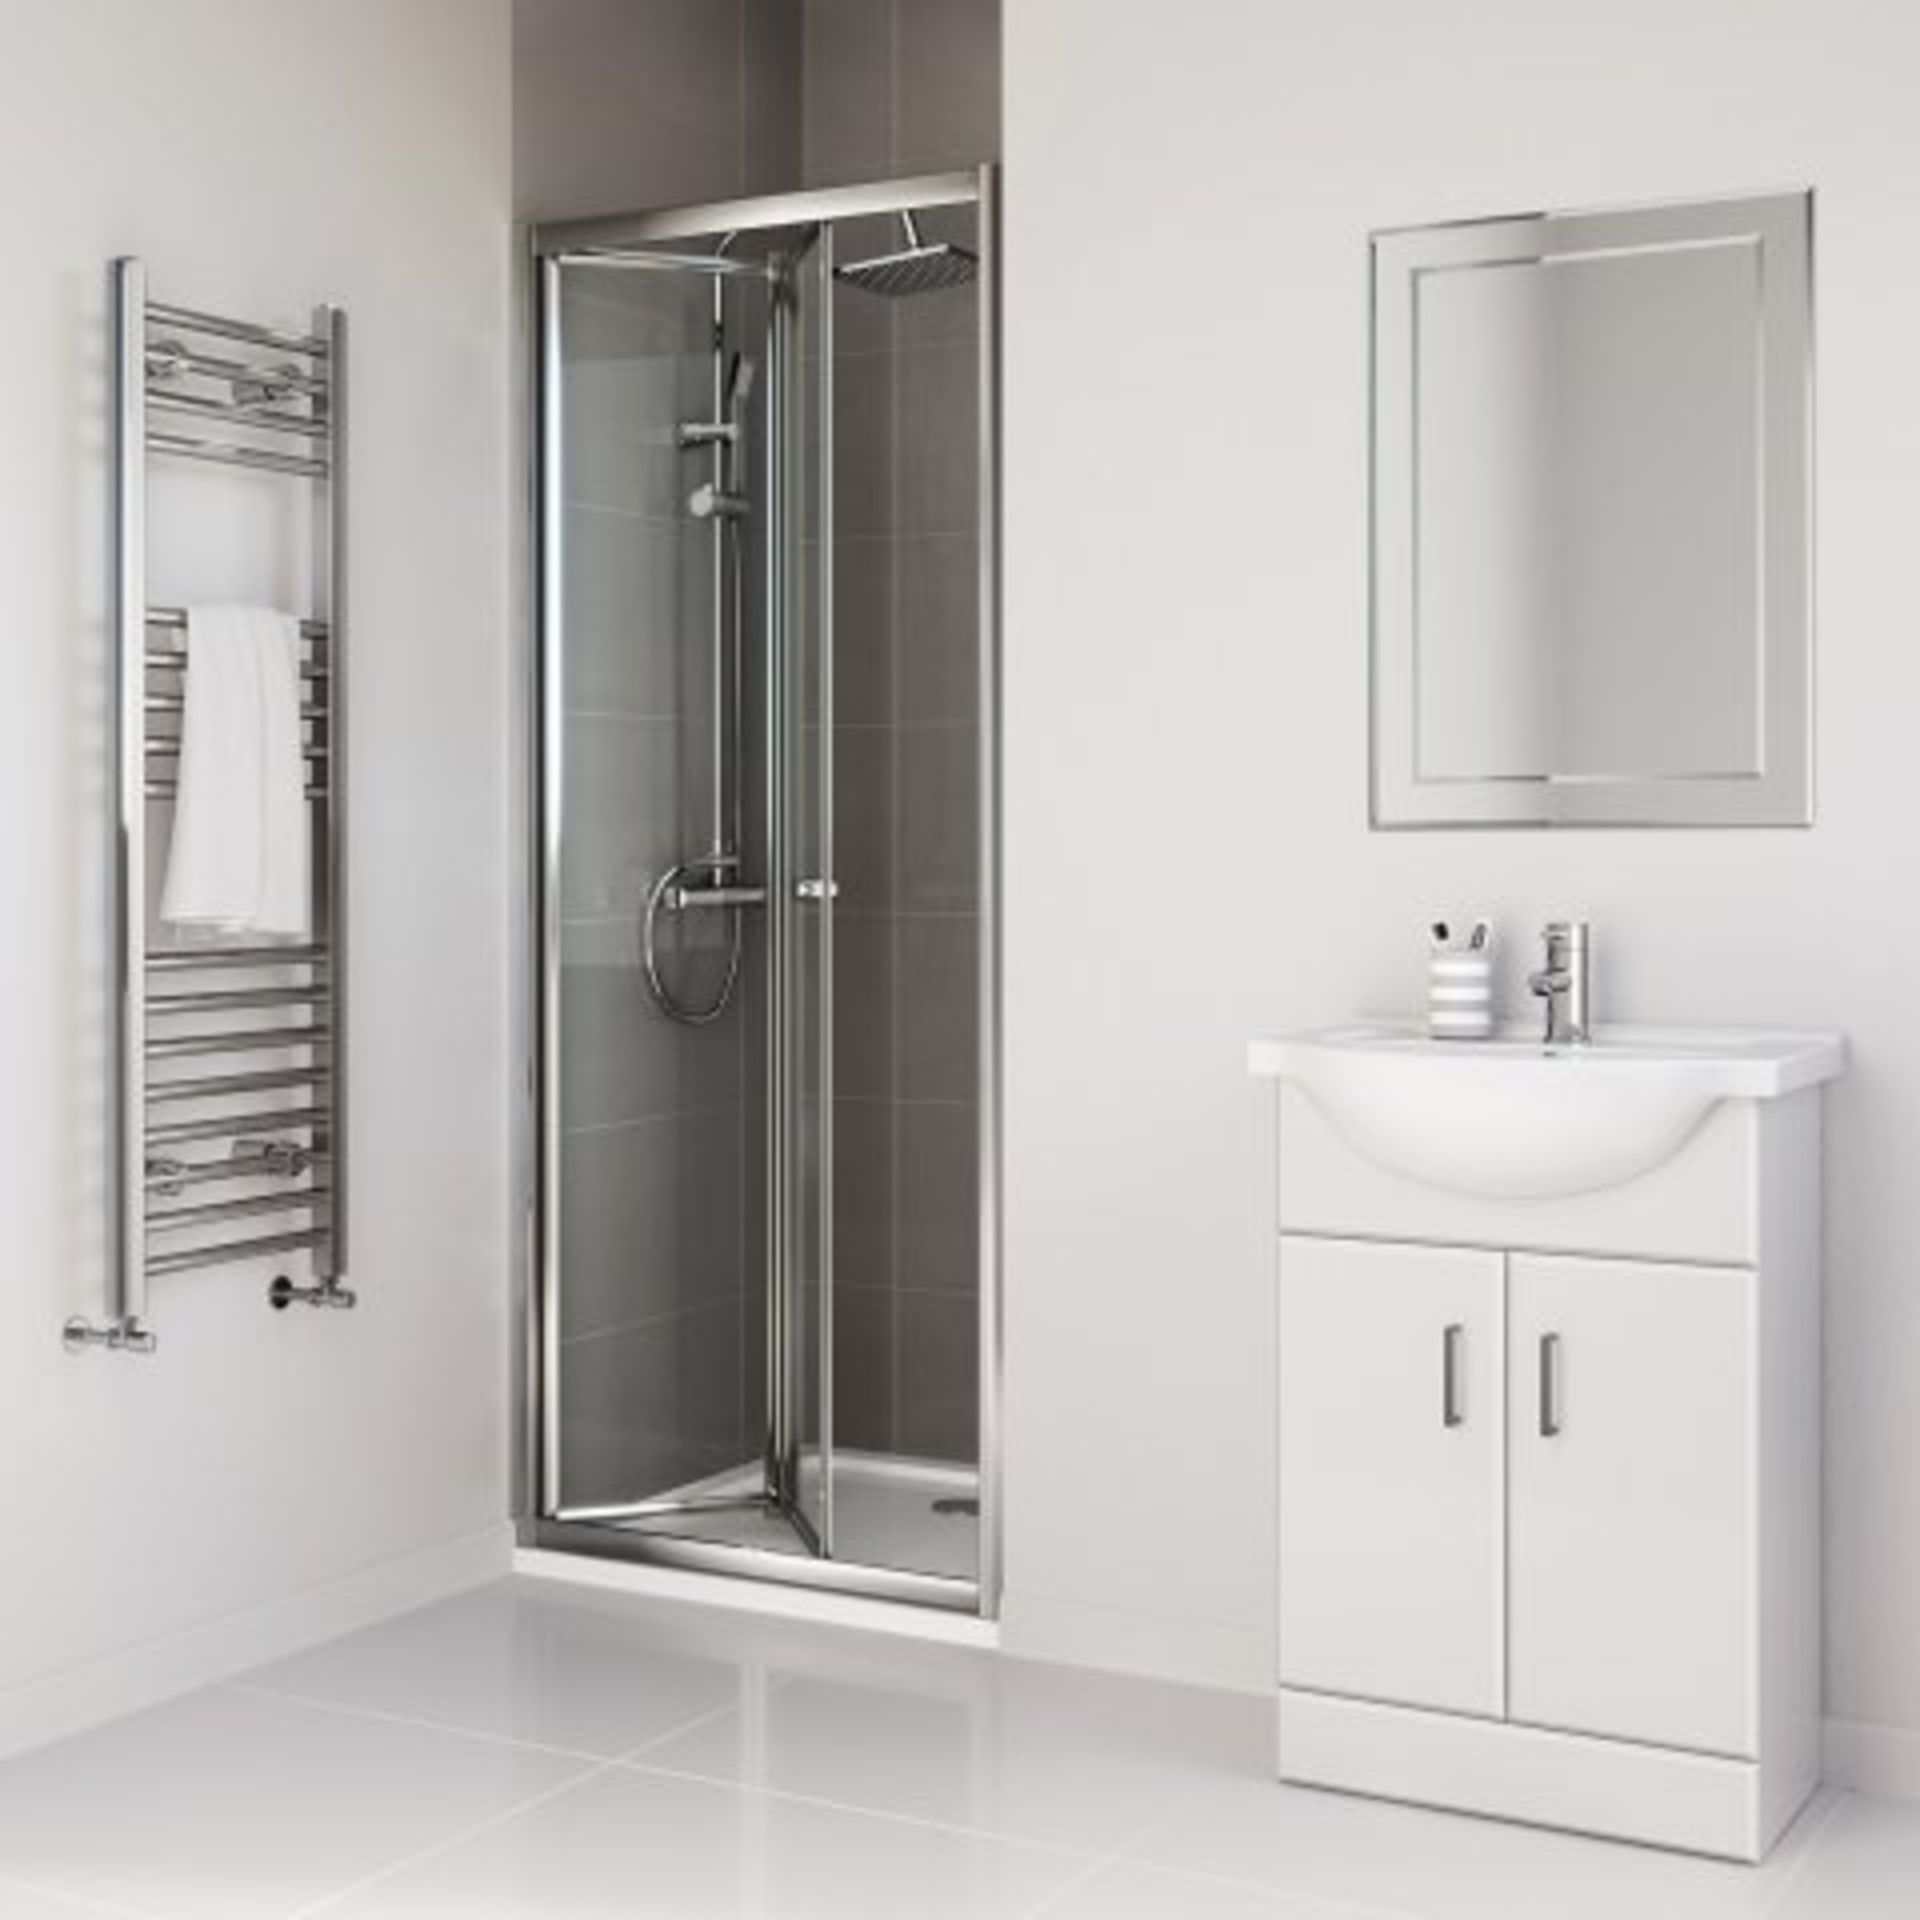 (H108) 800mm - Elements Bi Fold Shower Door. RRP £299.99._x00D__x00D_Do you have an awkward nook - Image 3 of 3